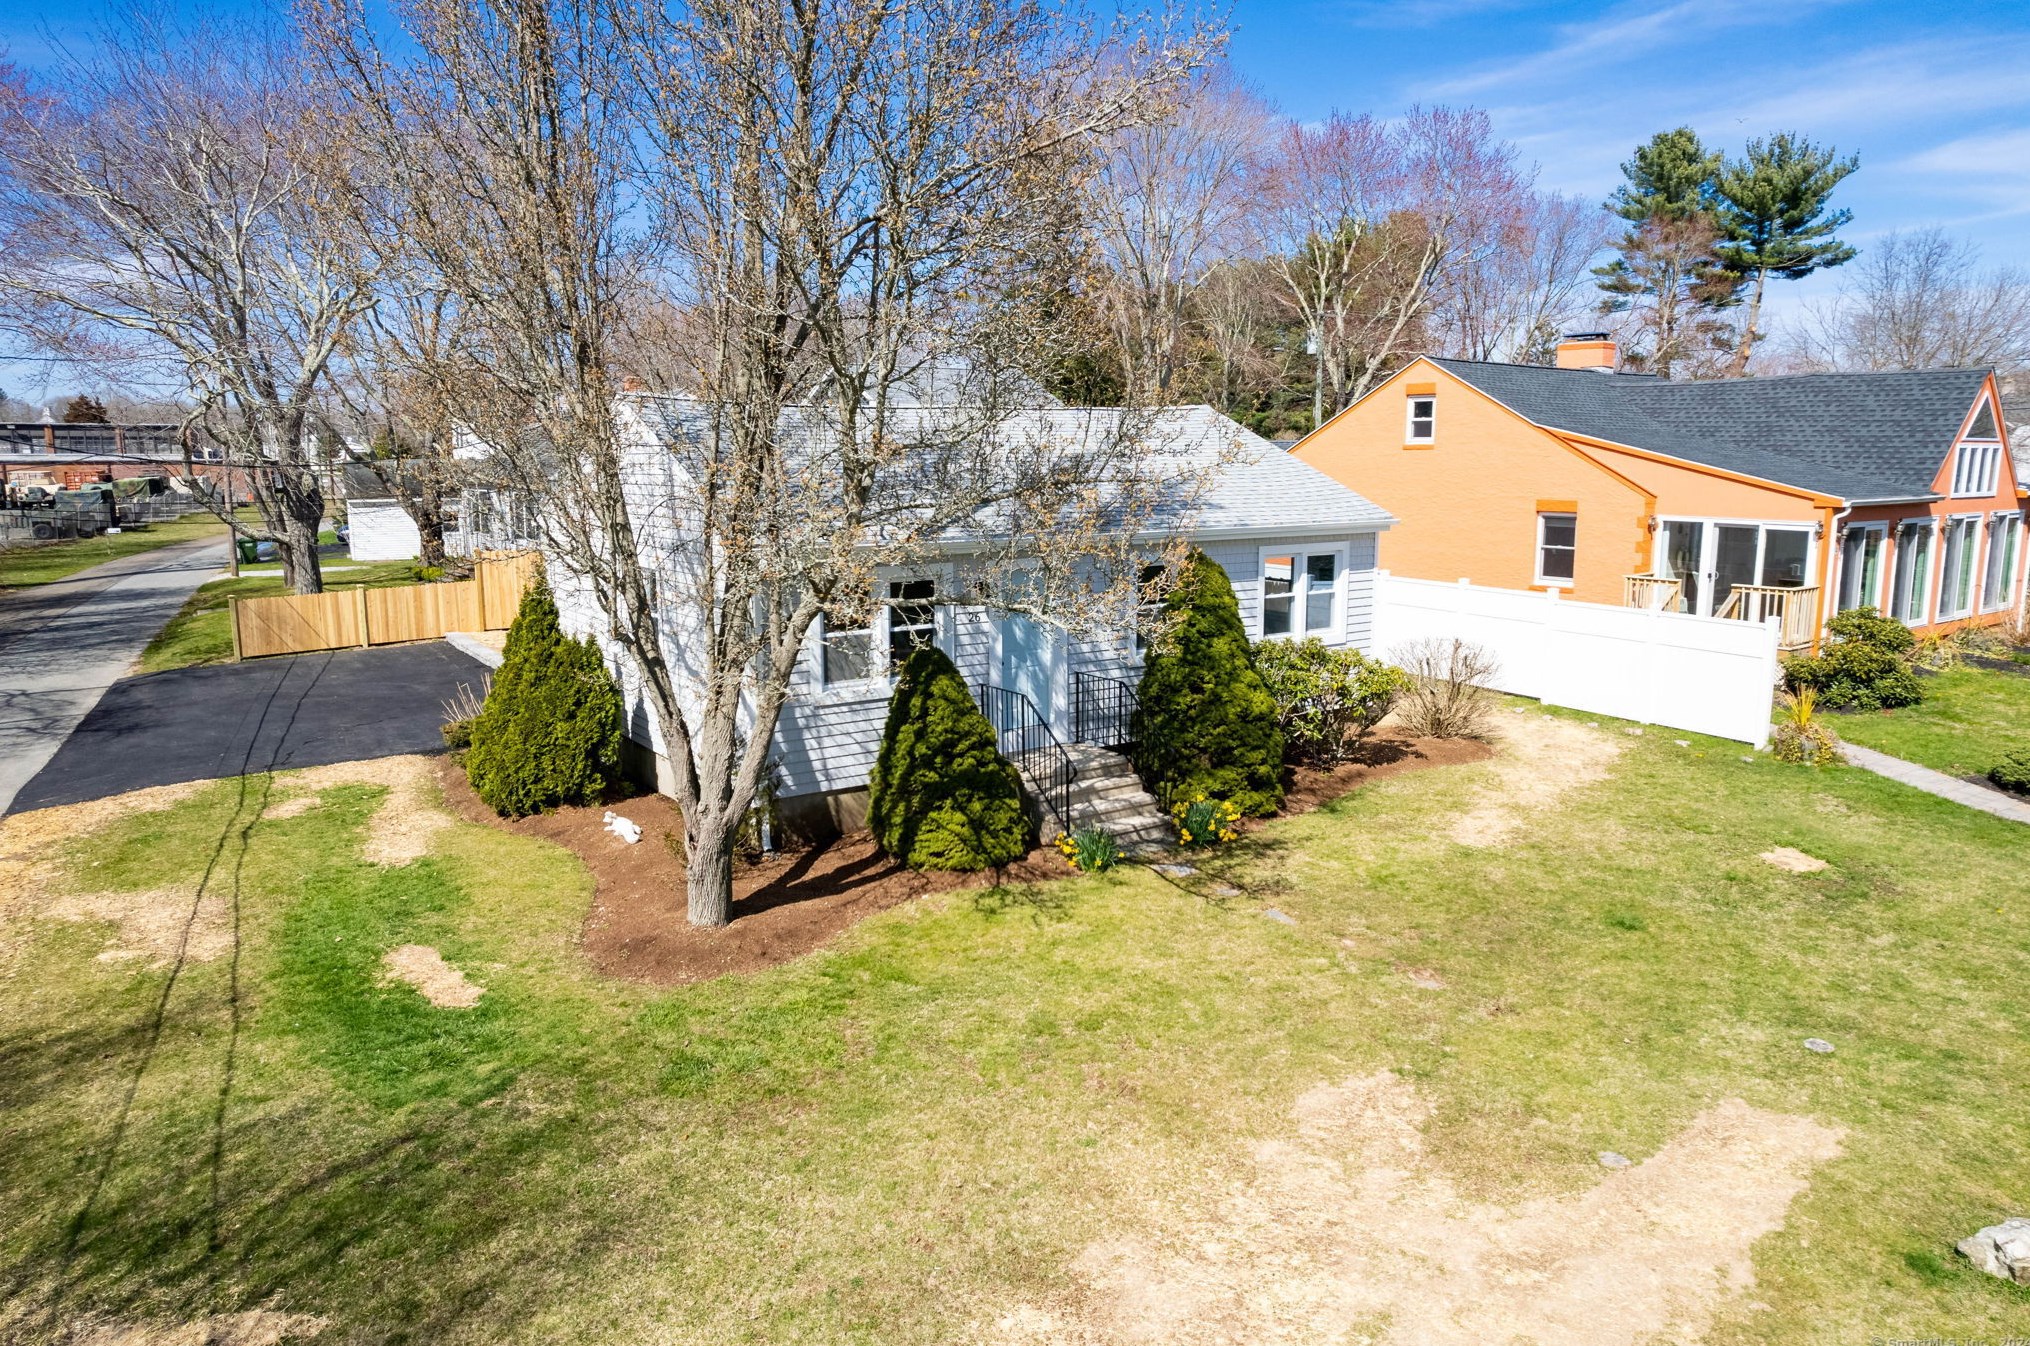 26 Brookside Ave W, Westbrook, CT 06498